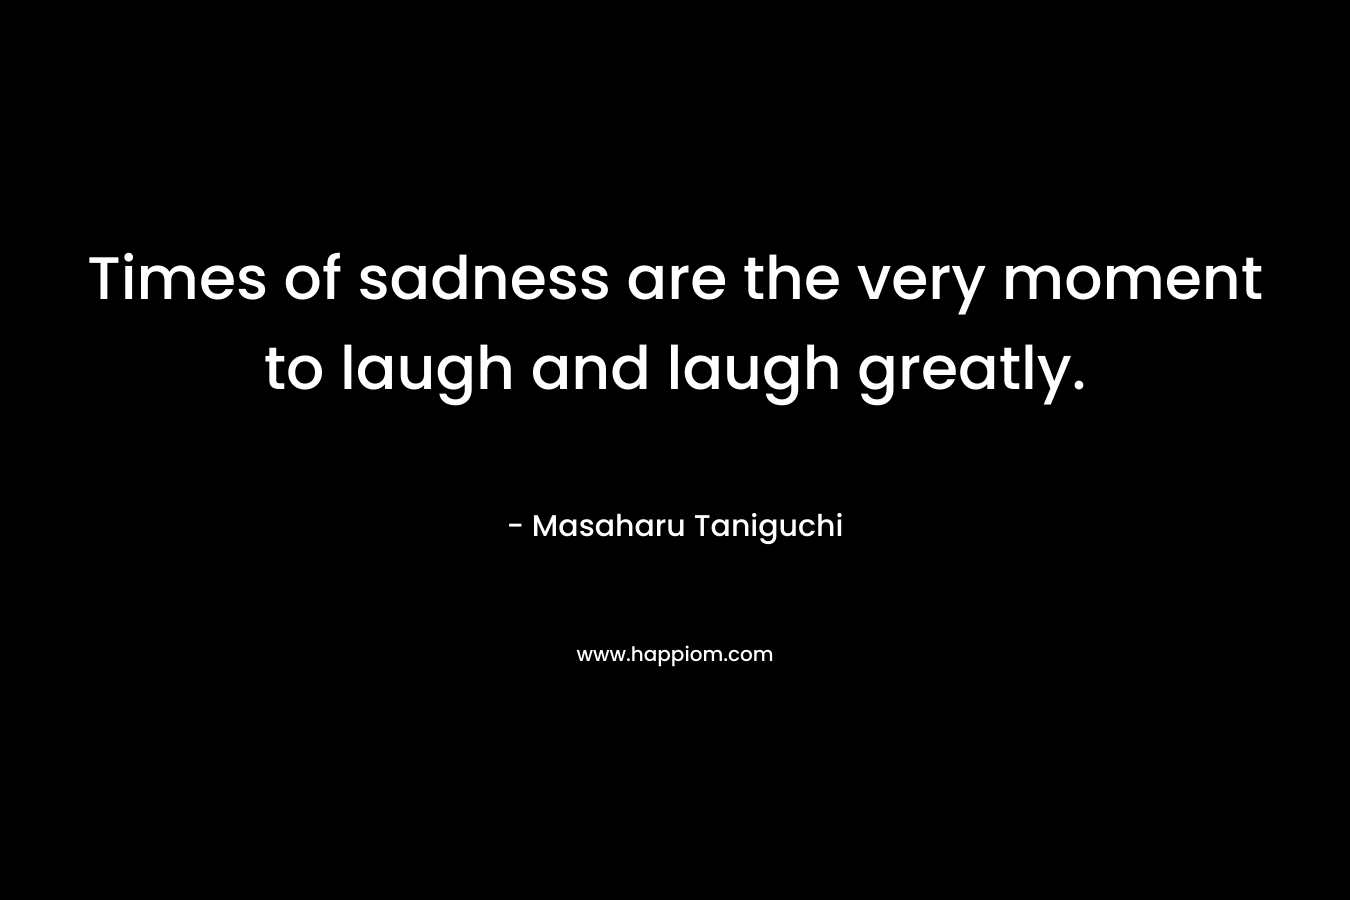 Times of sadness are the very moment to laugh and laugh greatly.